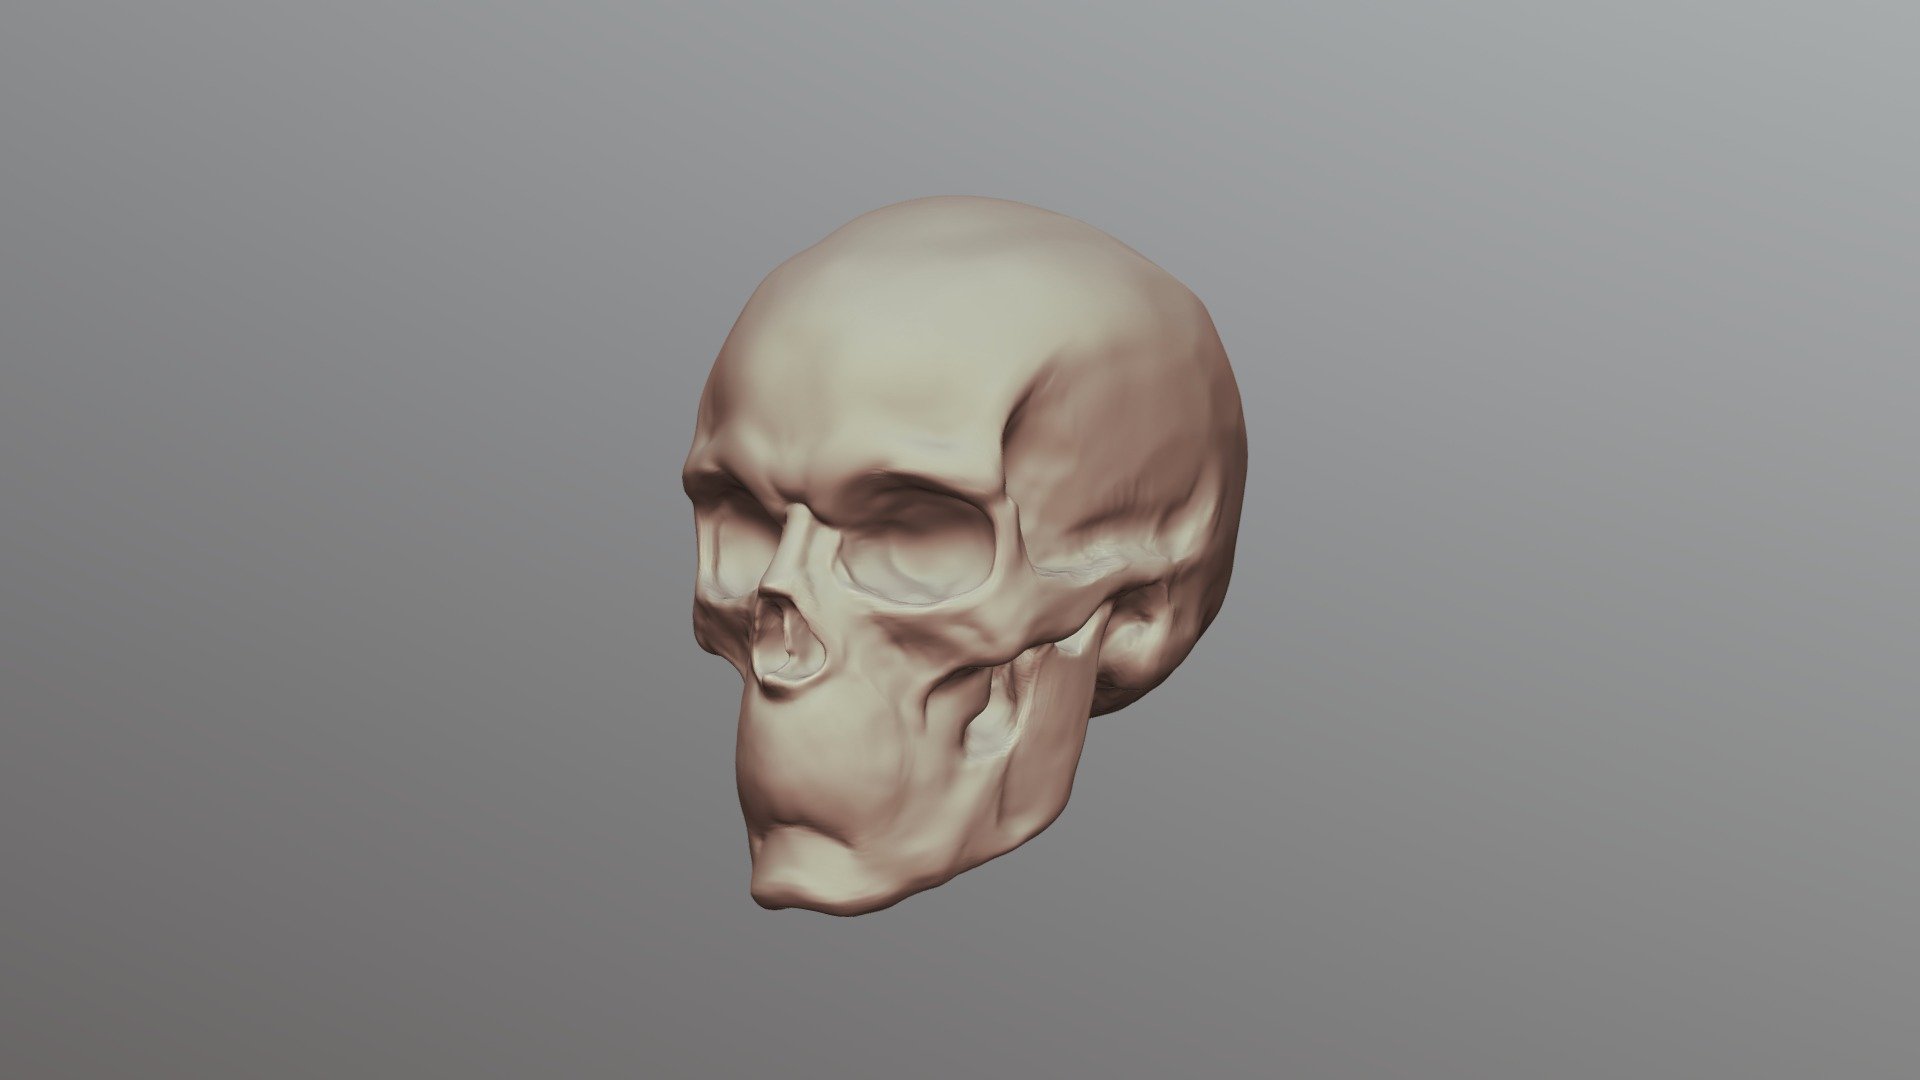 Simplified Skull 3D model by LCAD ZBrush Resources (donaldphan